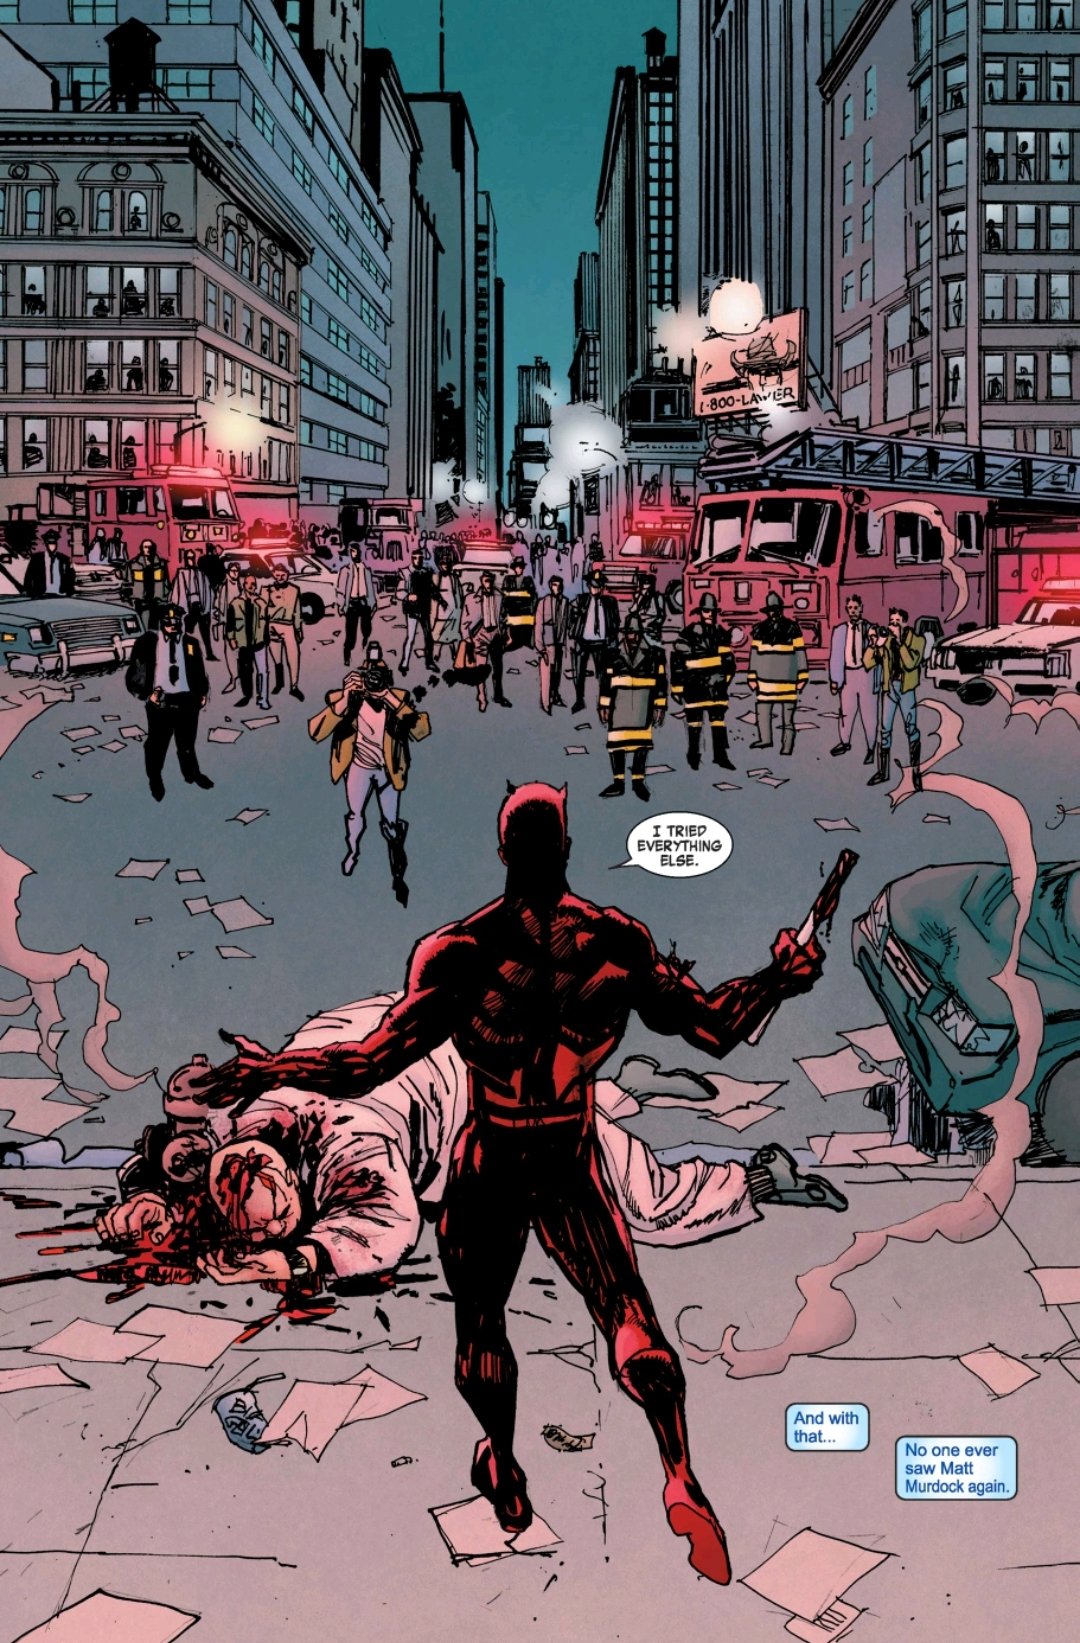 Daredevil after murdering Kingpin in the streets